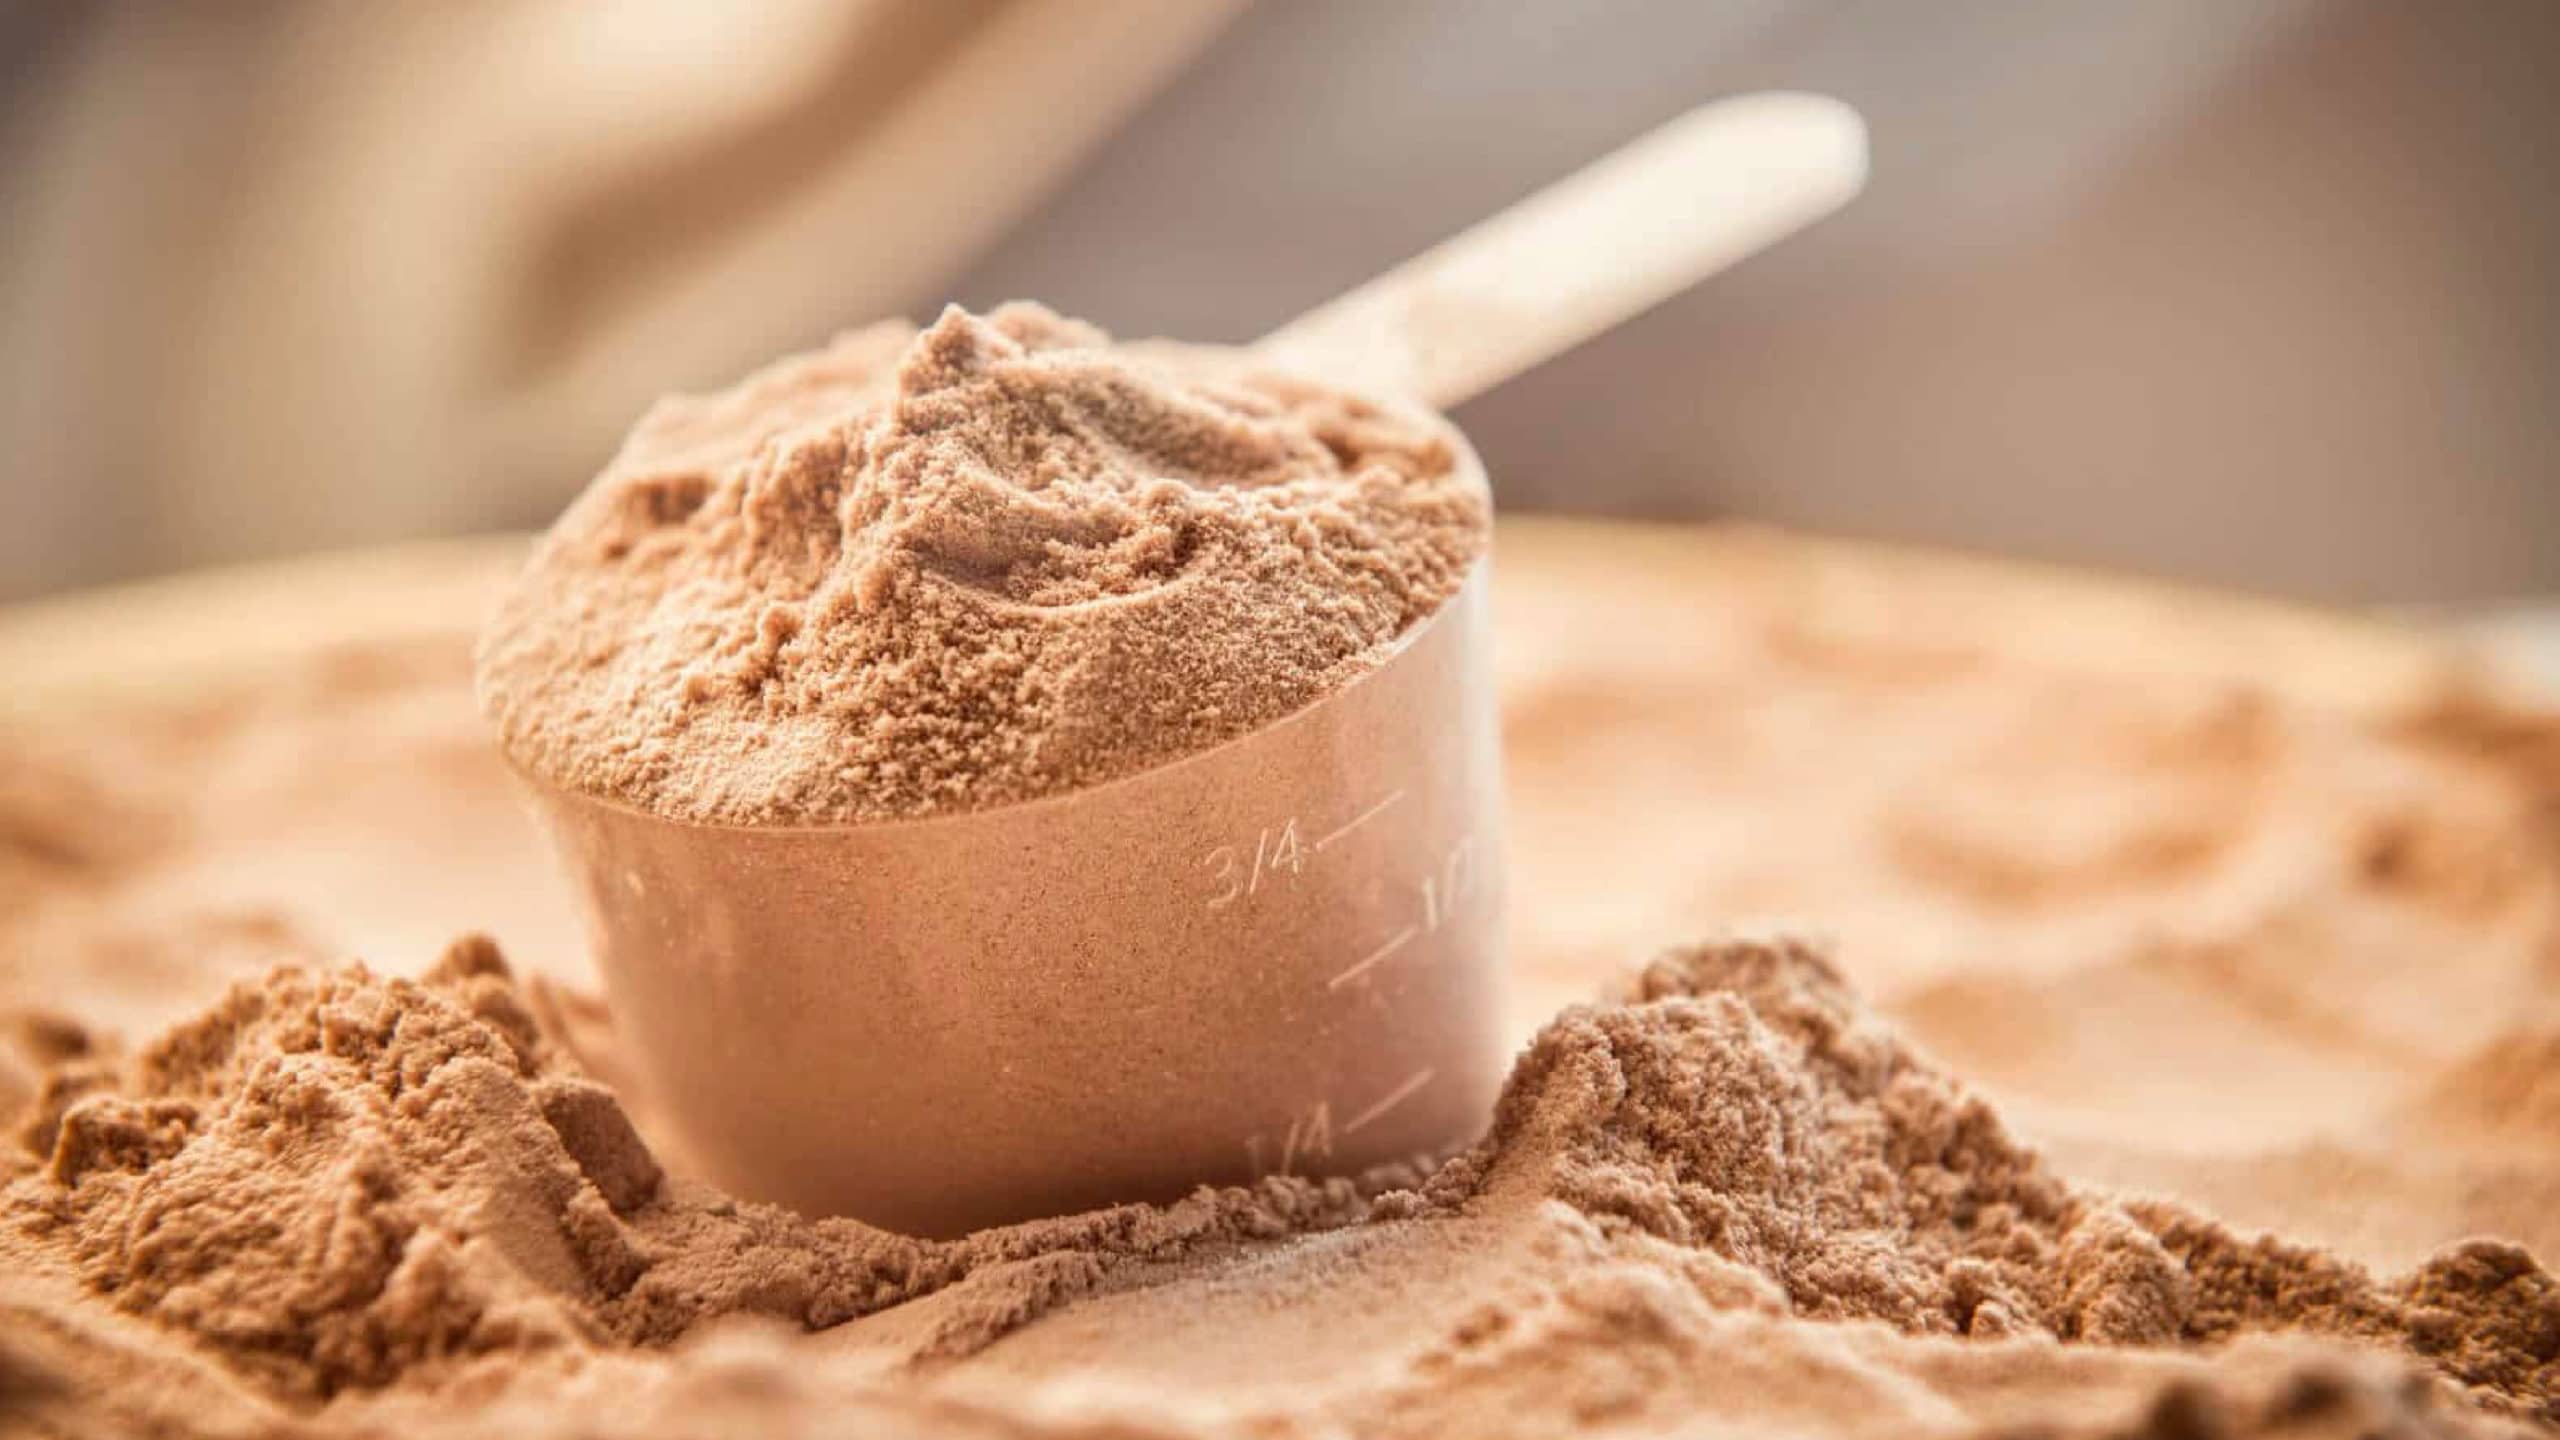 When is the best time to take Protein?